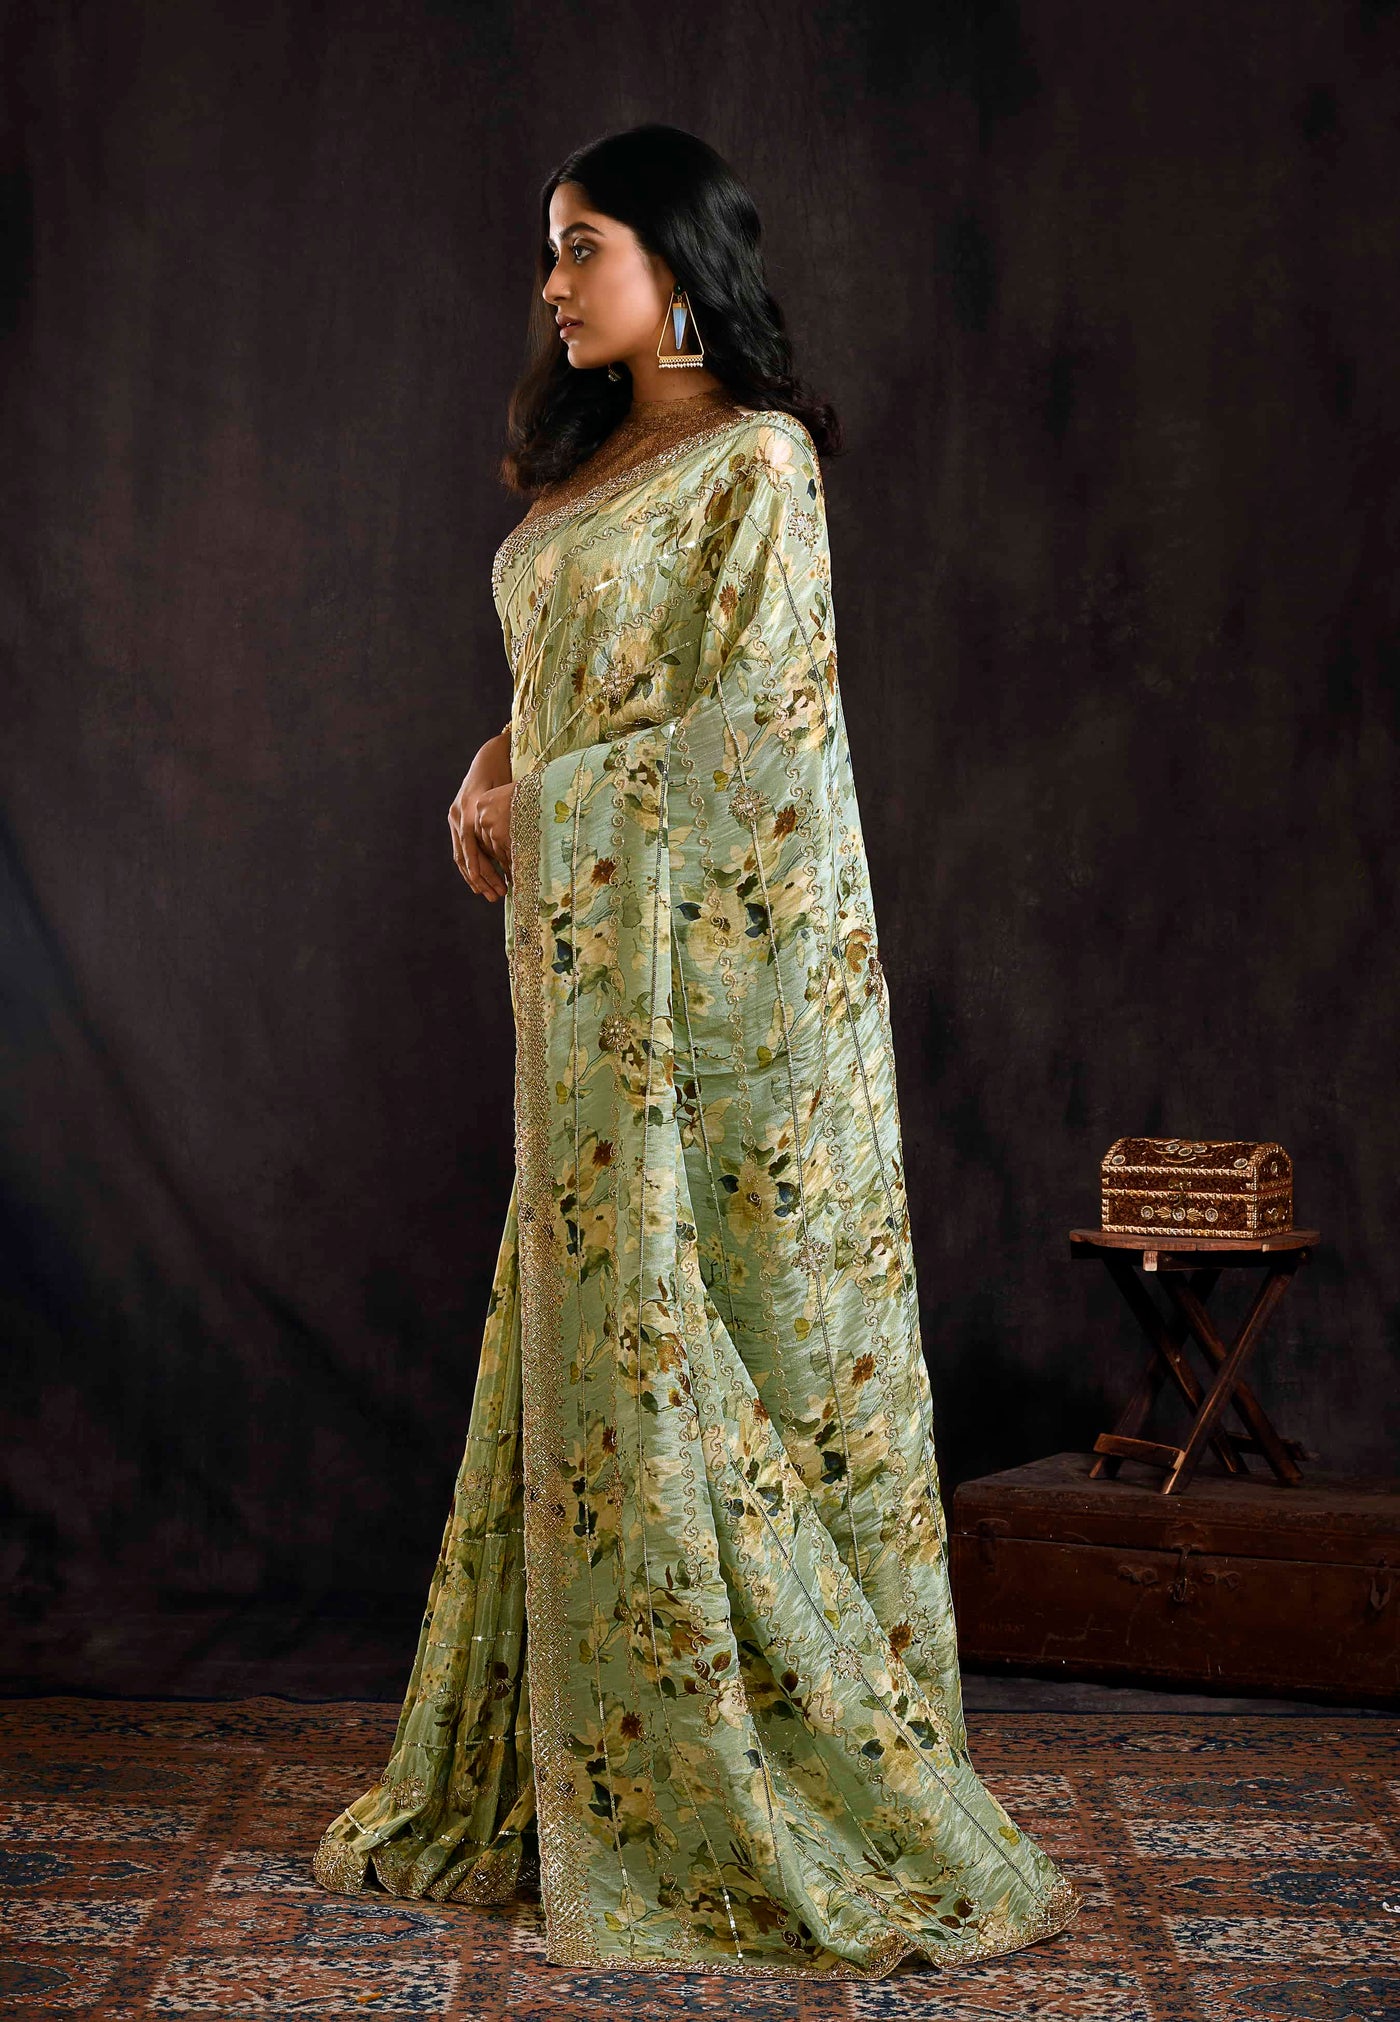 Pistachio Green Floral Embroidered Saree